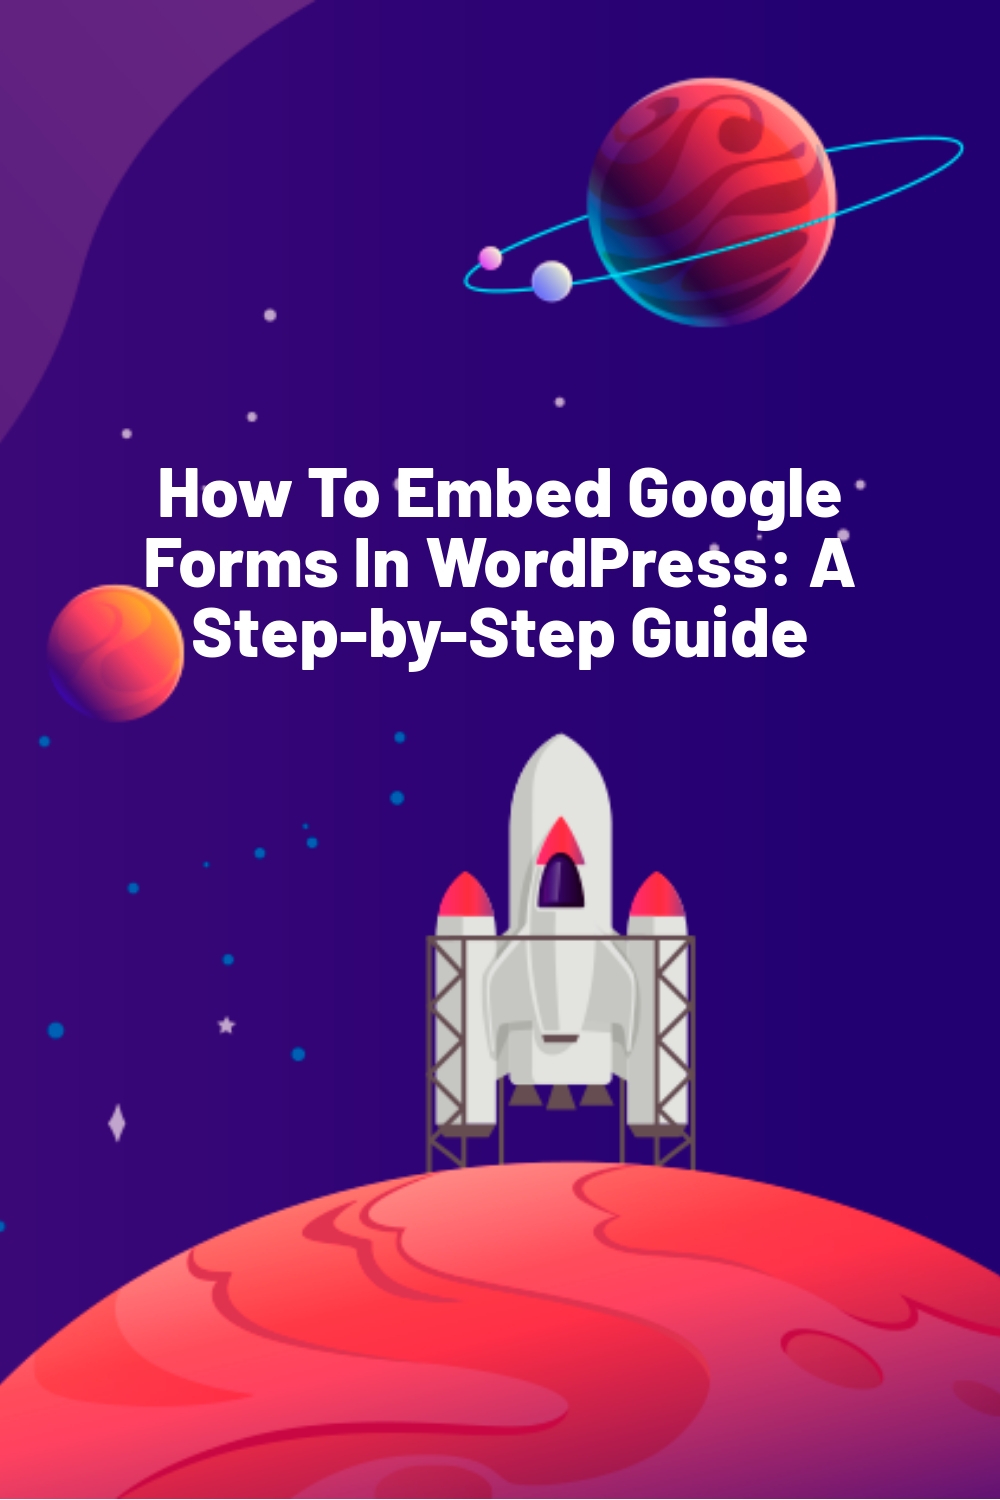 How To Embed Google Forms In WordPress: A Step-by-Step Guide